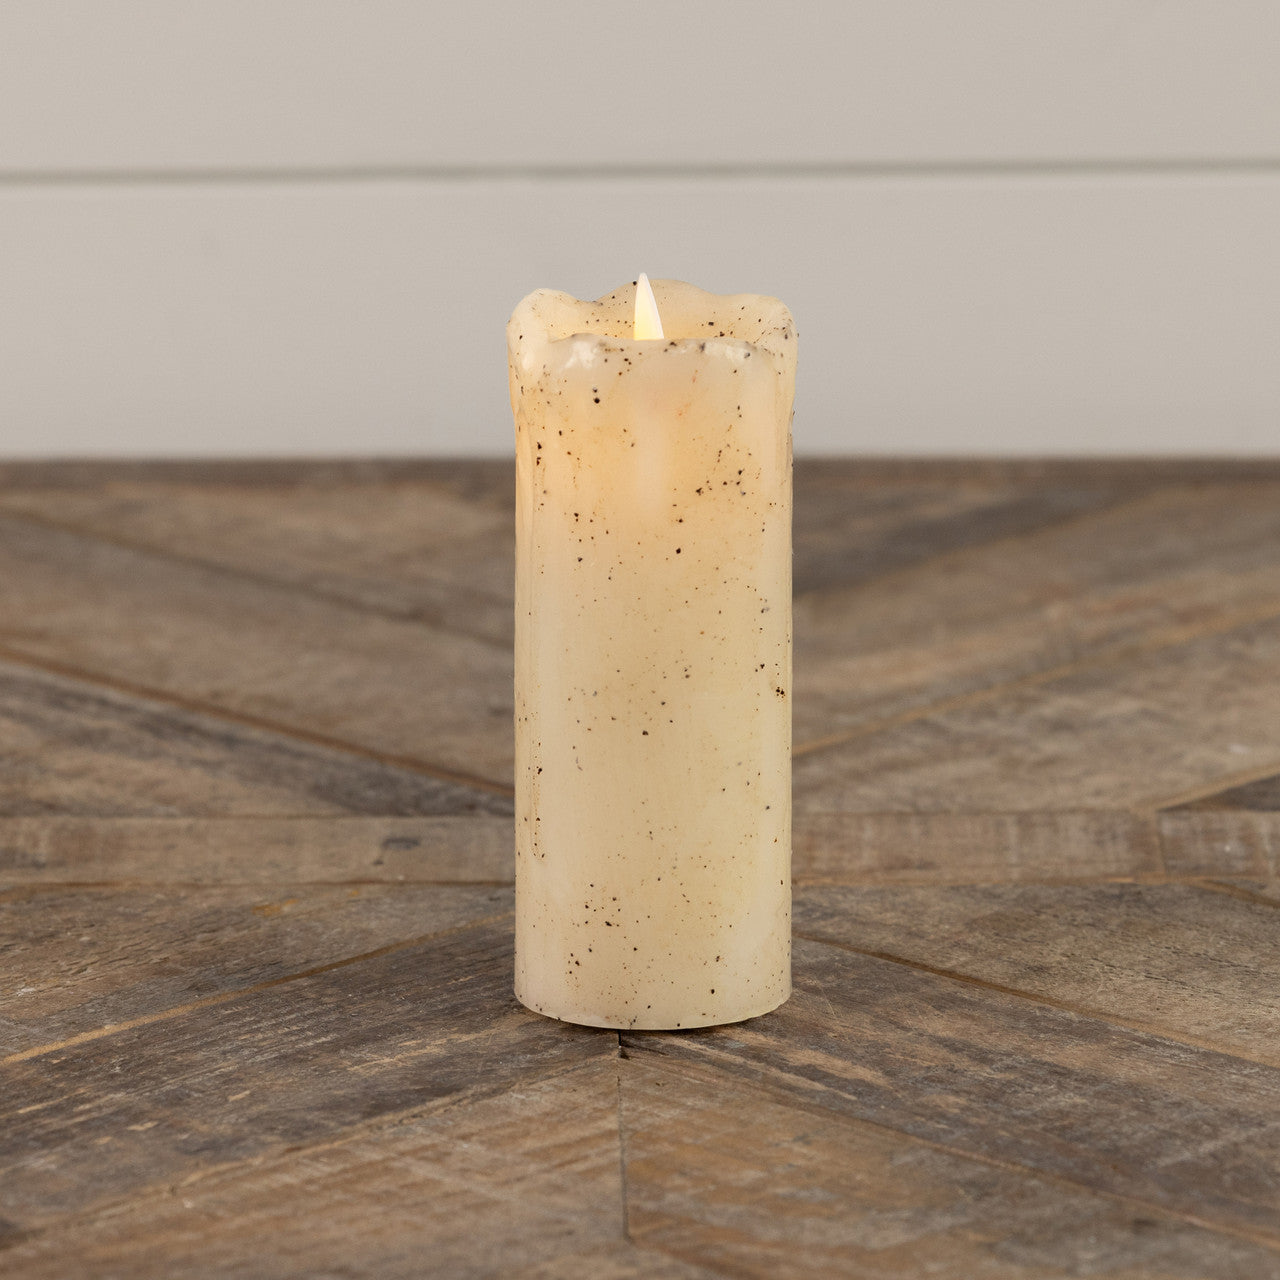 2X5" MOVING FLAME CREAM PILLAR CANDLE